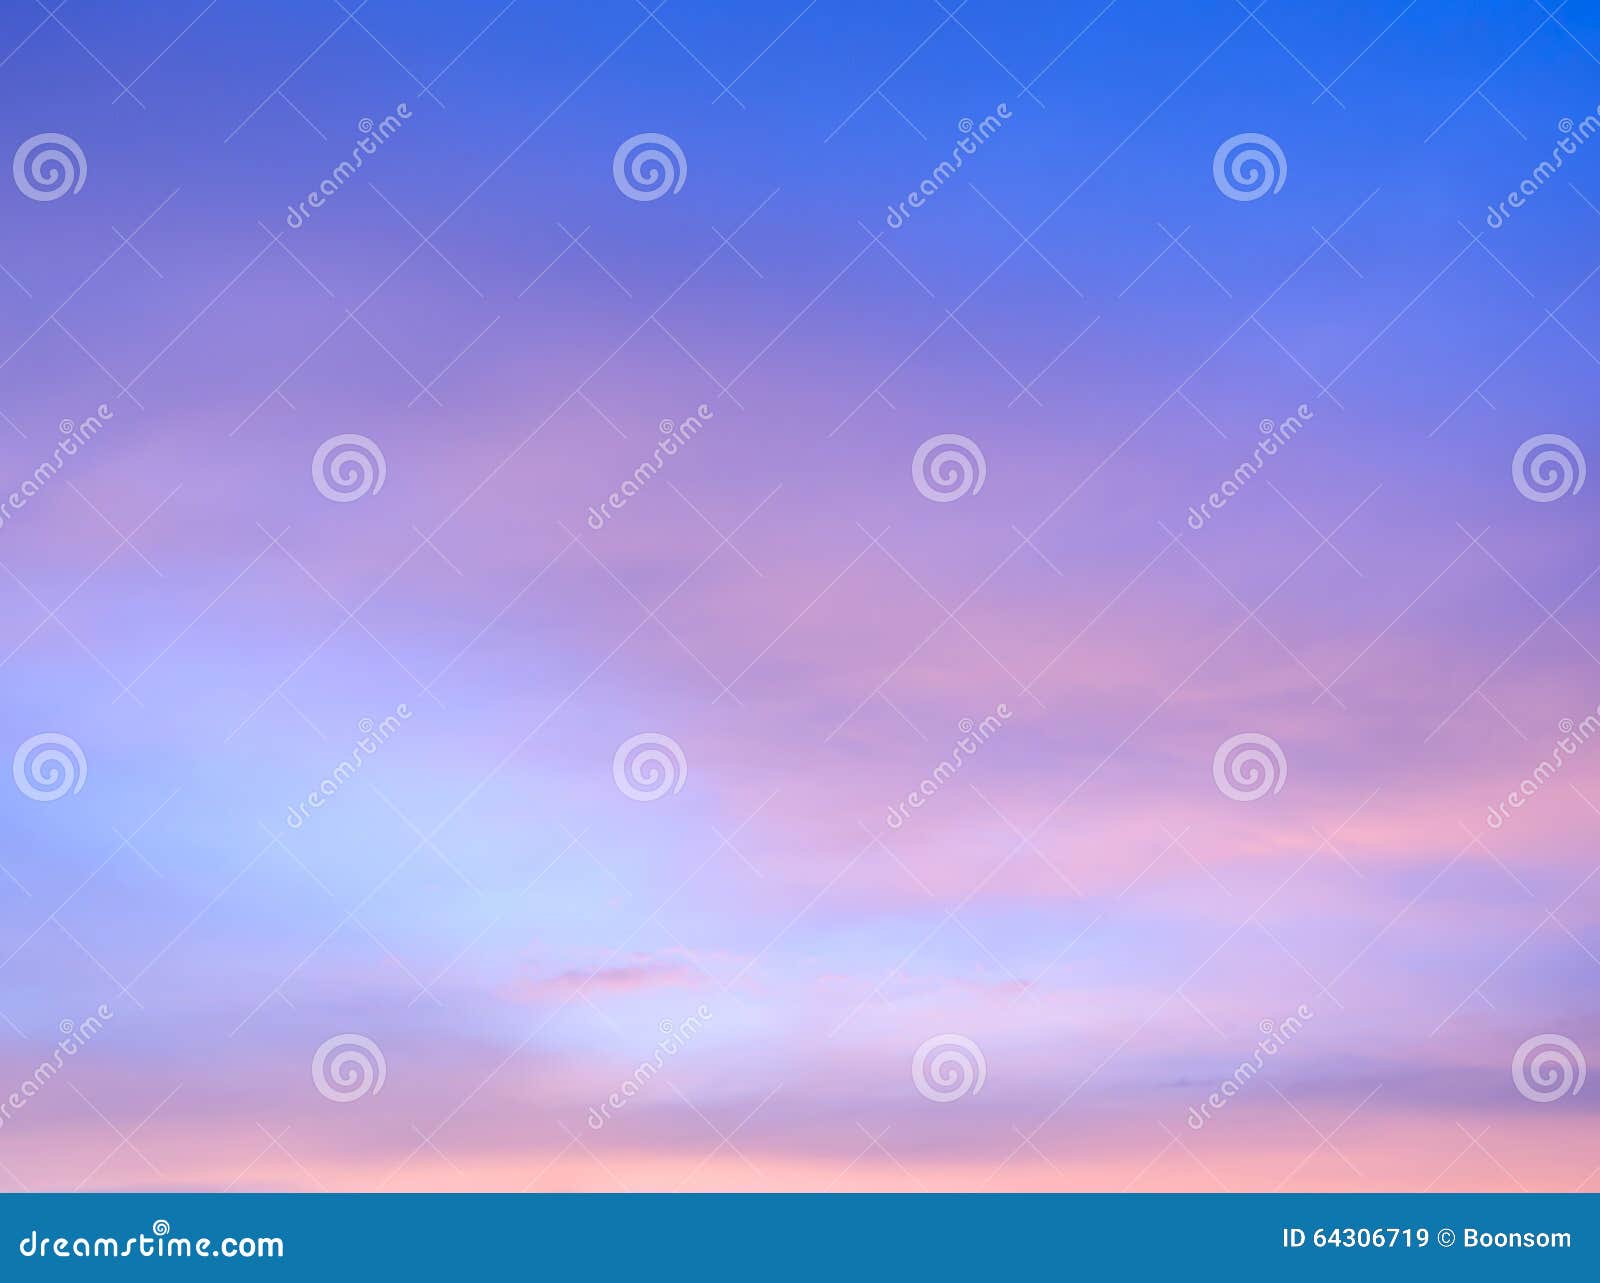 abstract twilight sky background